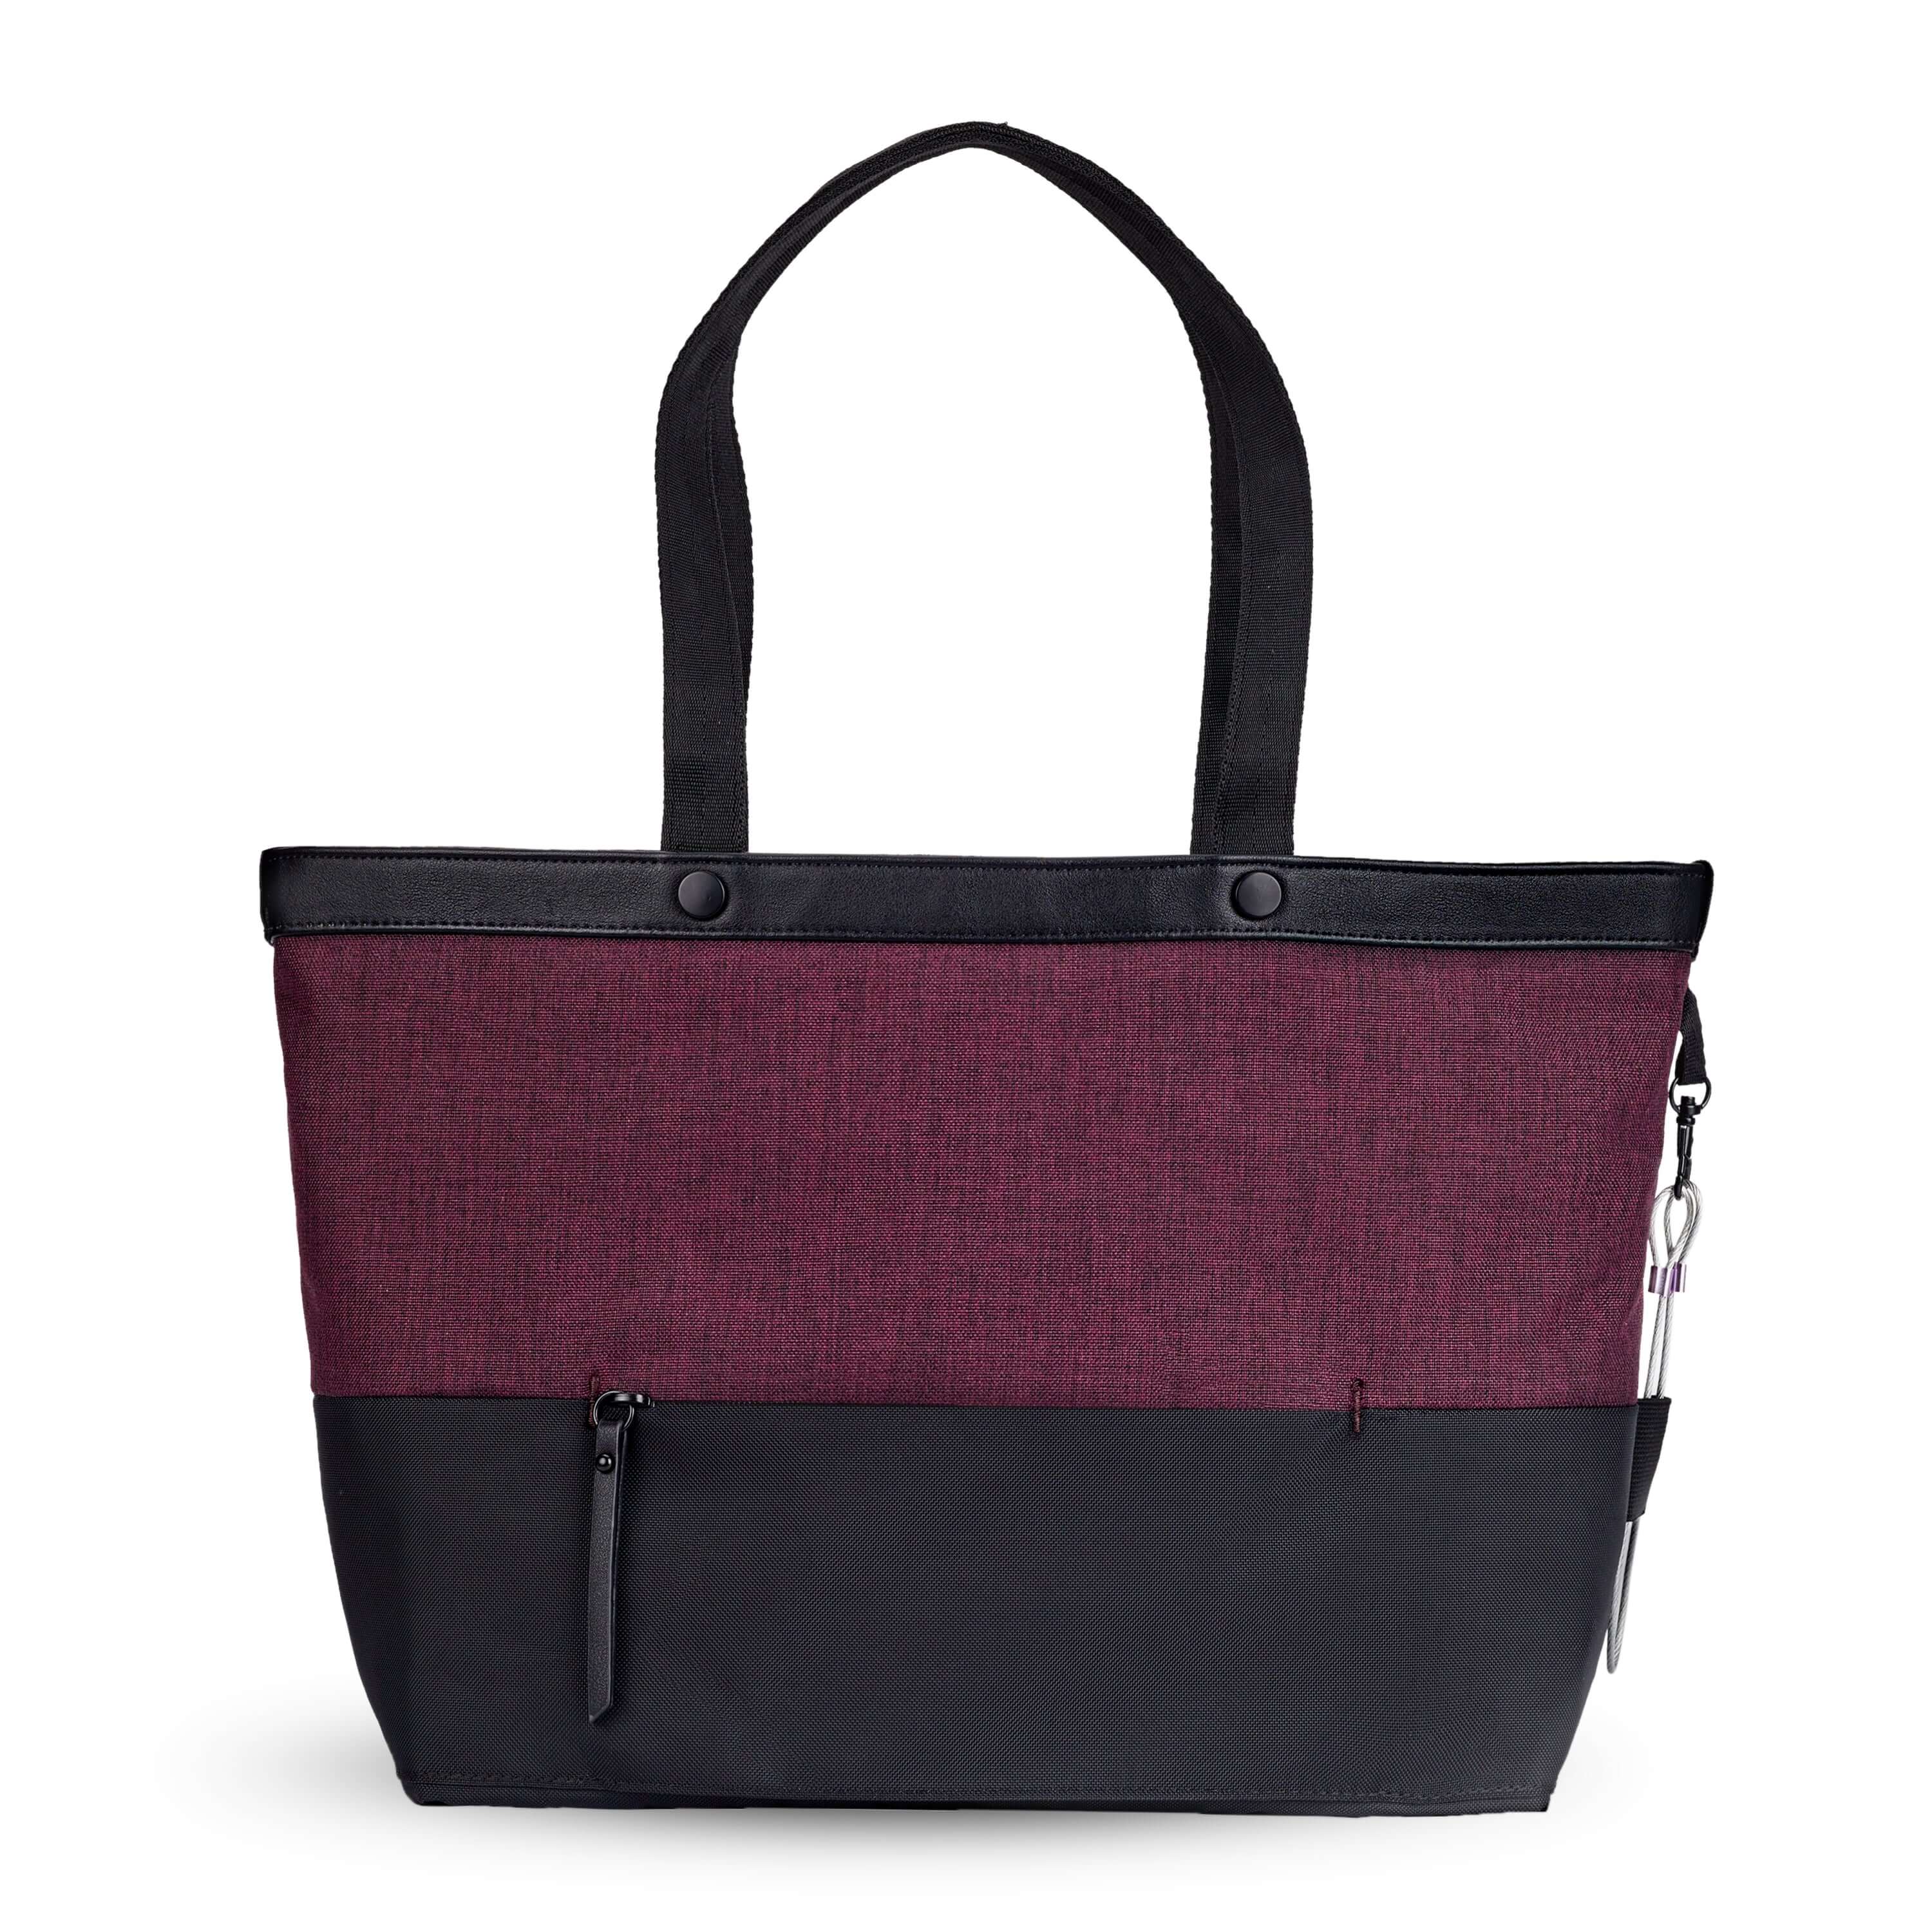 Back view of Sherpani's Anti-Theft tote, the Cali AT in Merlot, with vegan leather accents in black. There is a zipper compartment that acts as a luggage pass-through or trolley sleve, and a chair loop lock on one side that is secured by an elastic tab. 